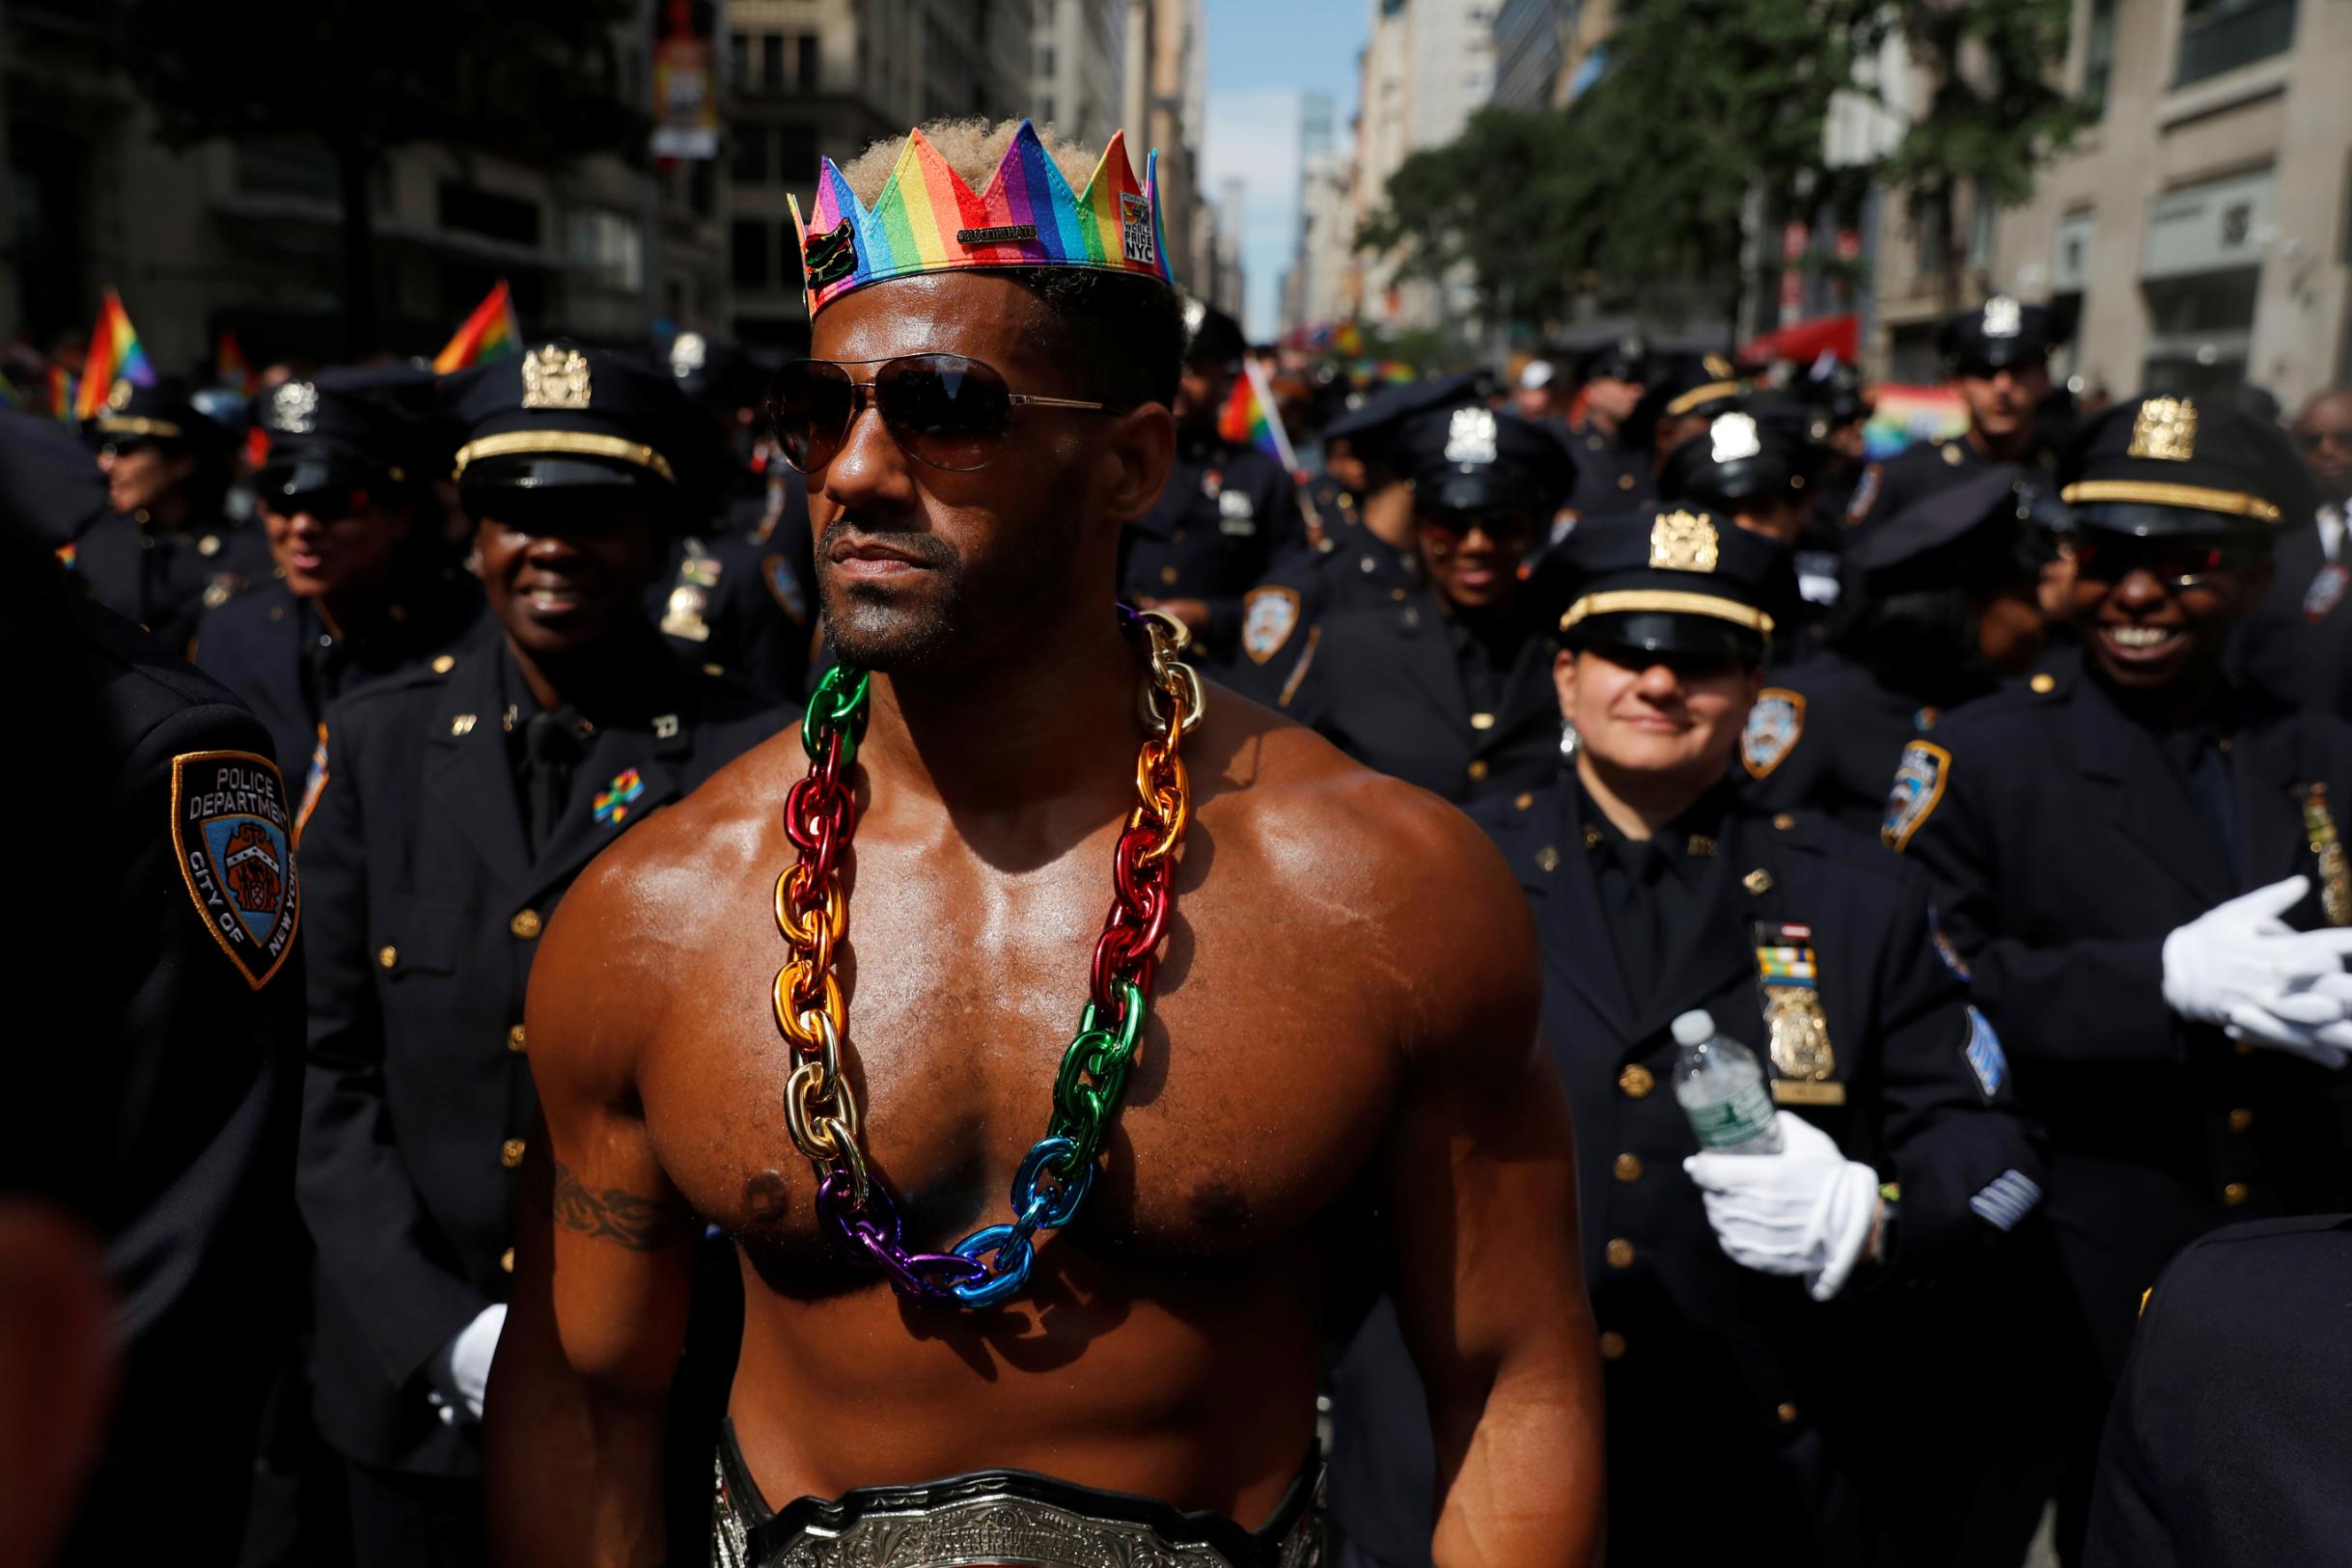 Nyc Pride Parade Organizers Ban The Nypd From Its Events Until 2025 Wsvn 7news Miami News 